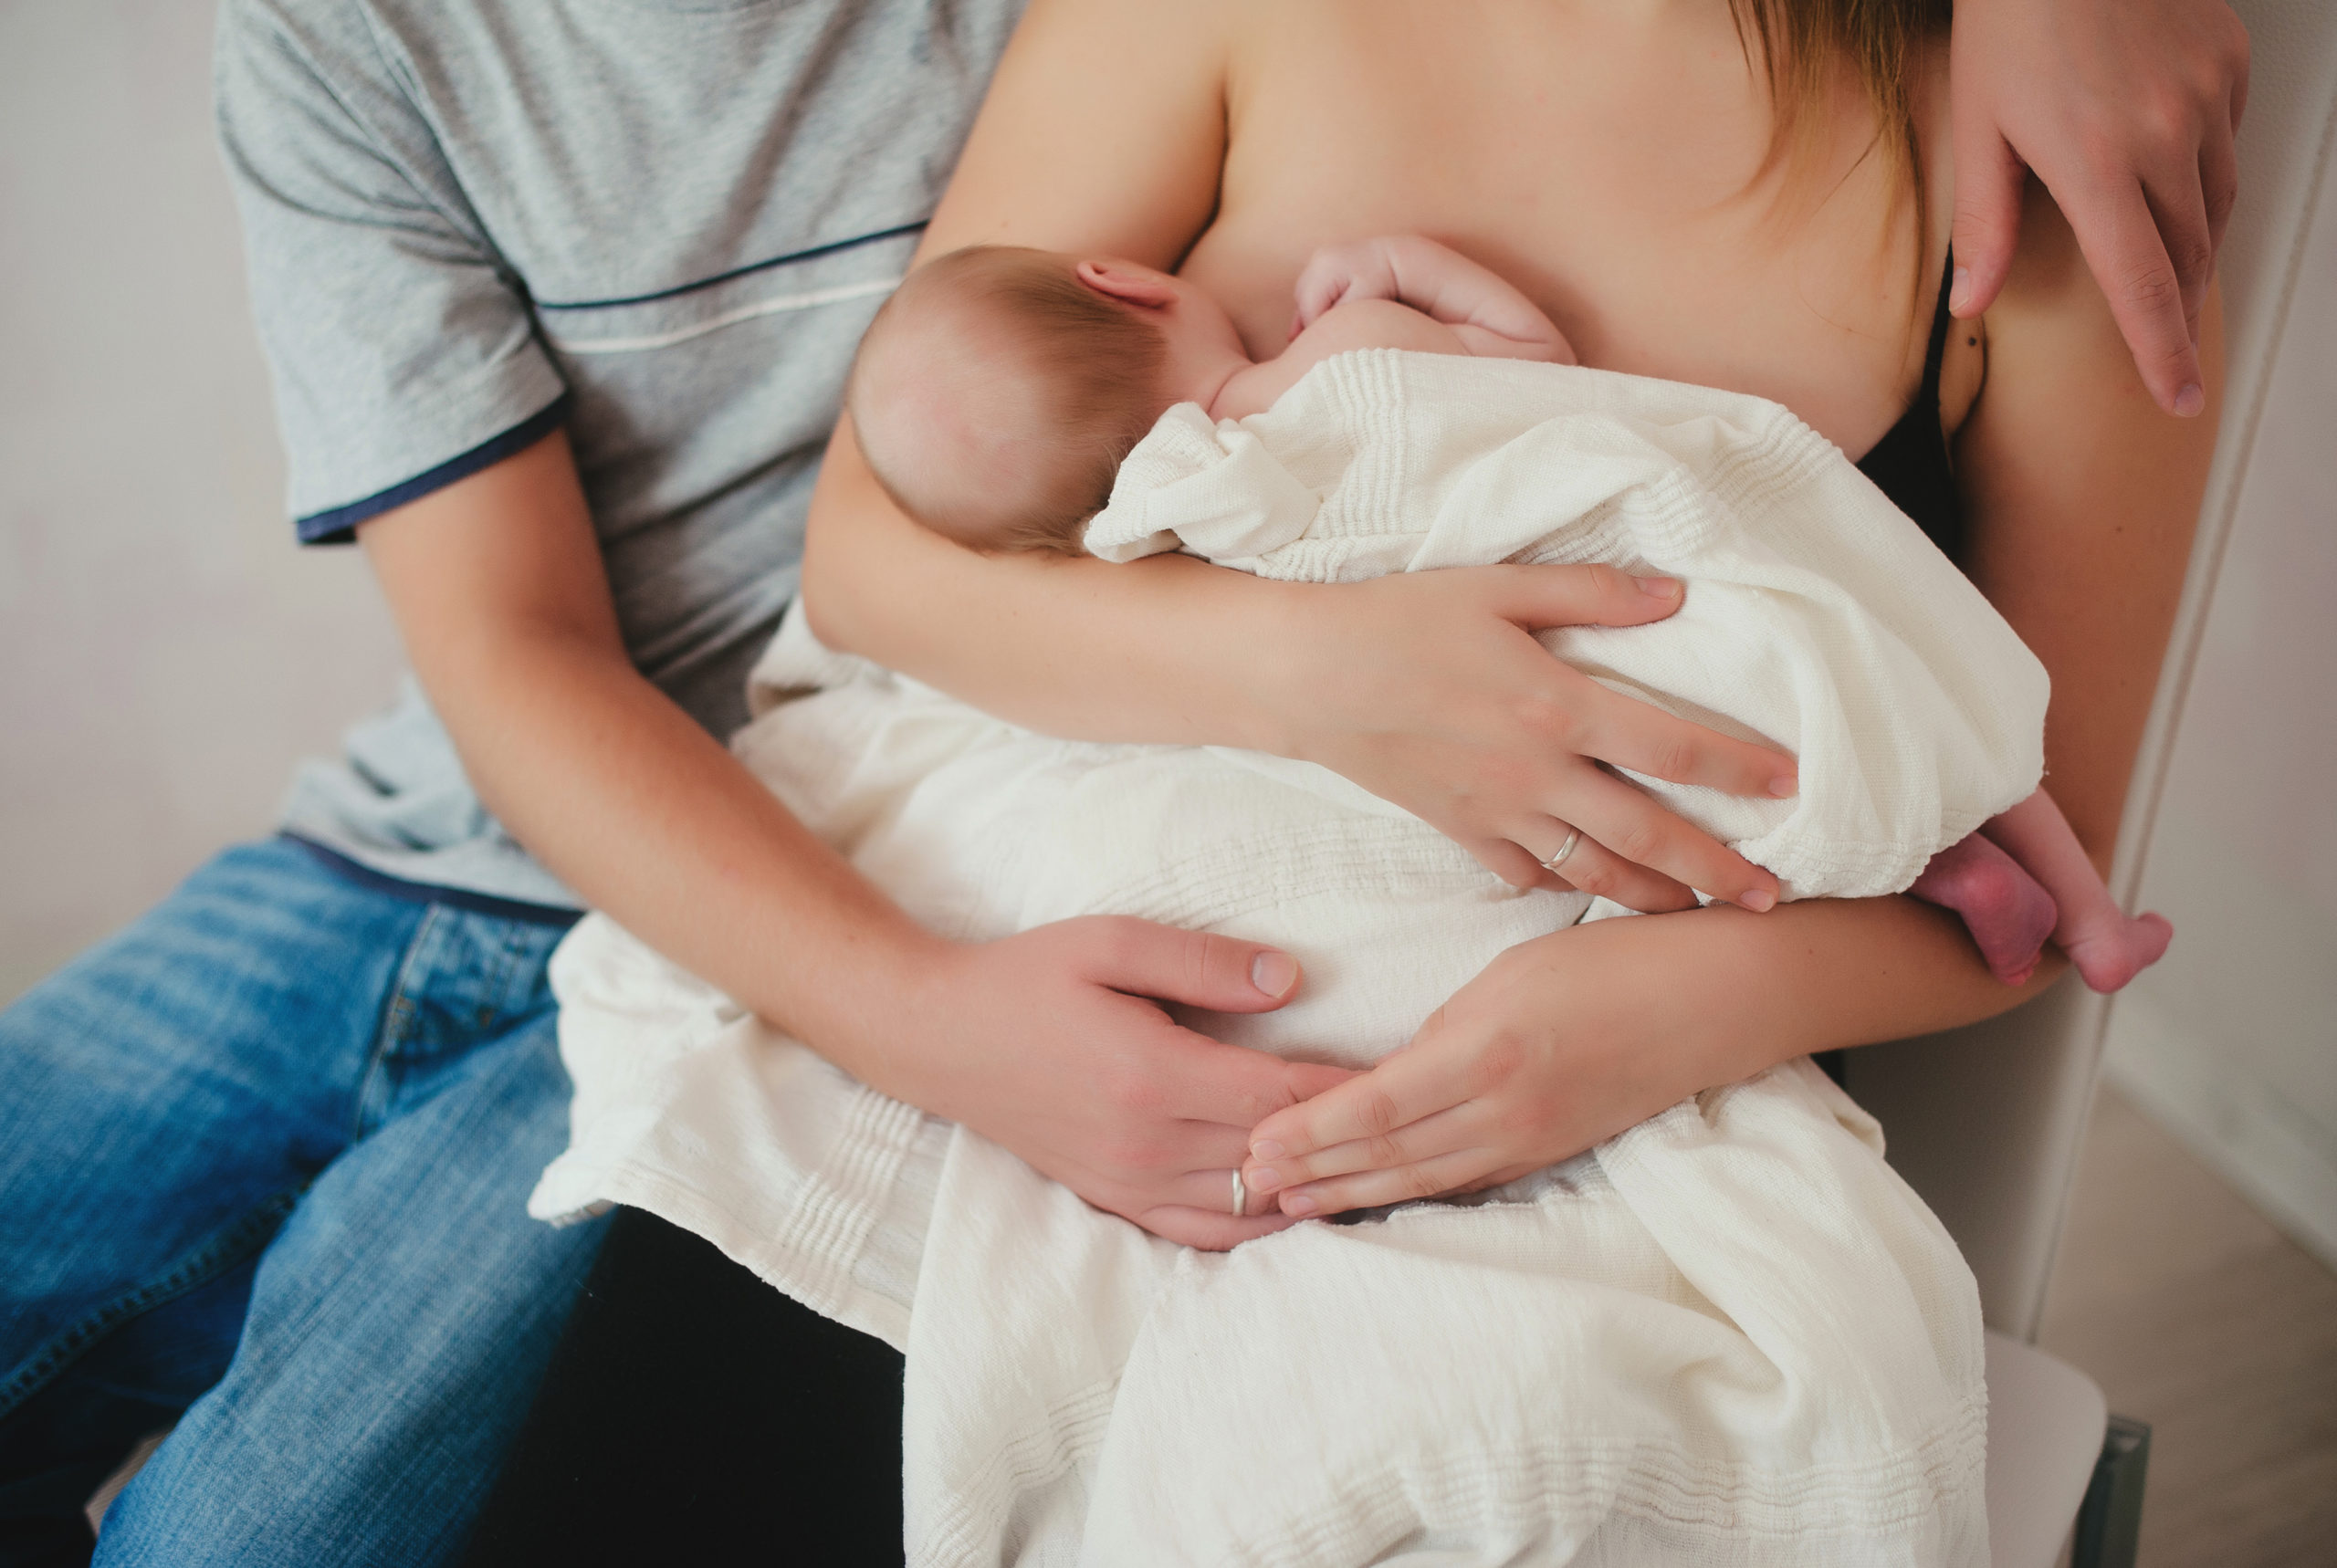 How to Increase Milk Supply When Pumping - Breastfeeding Support